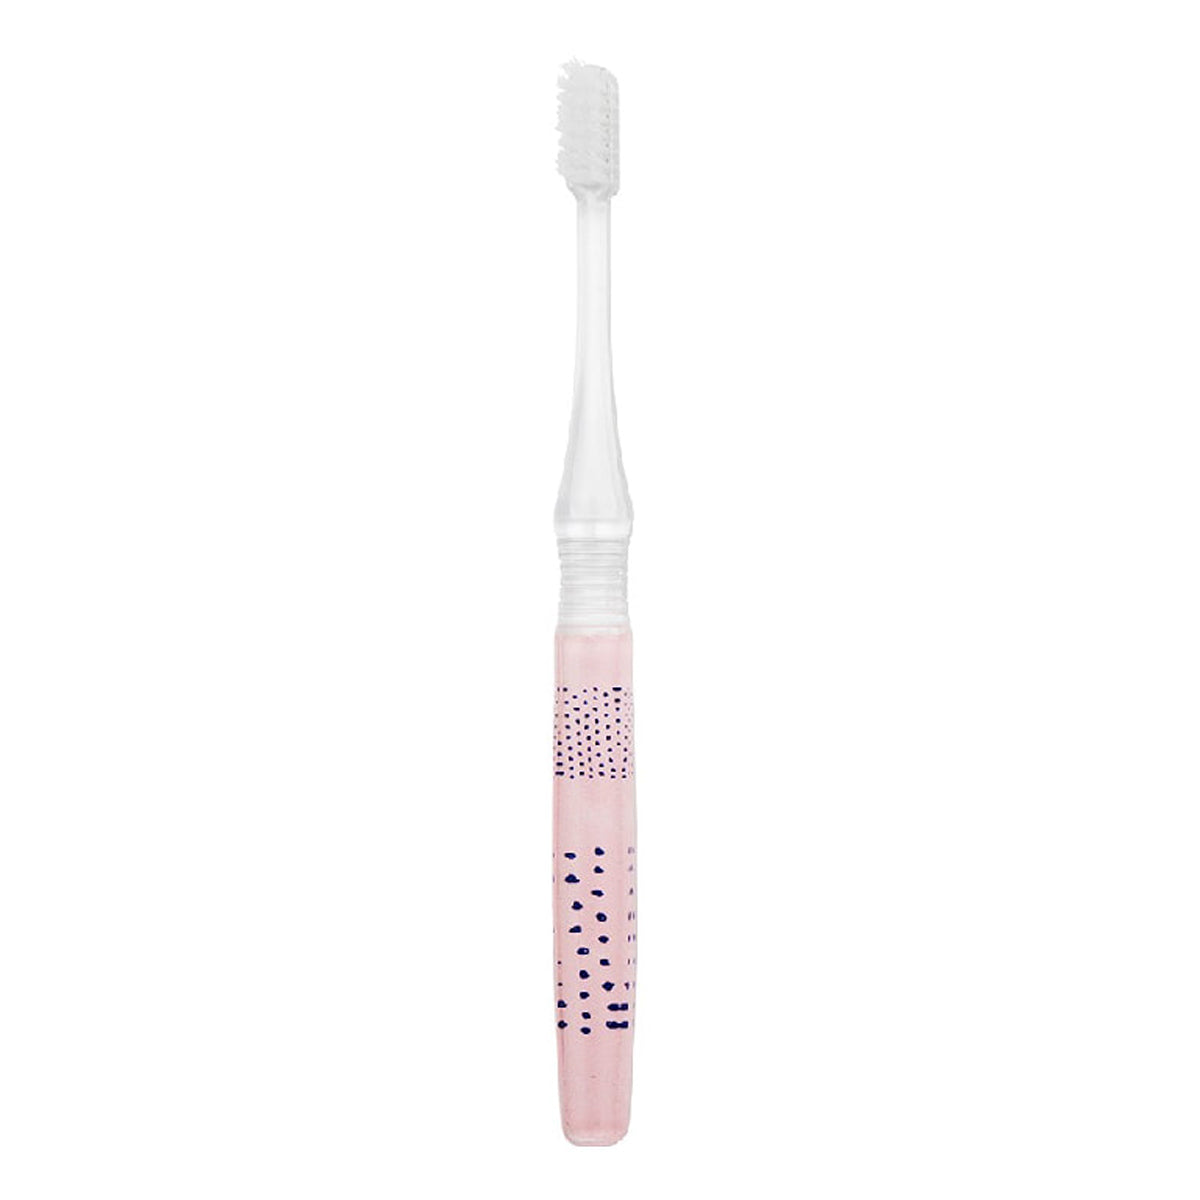 Primary image of DF 8 Toothbrush